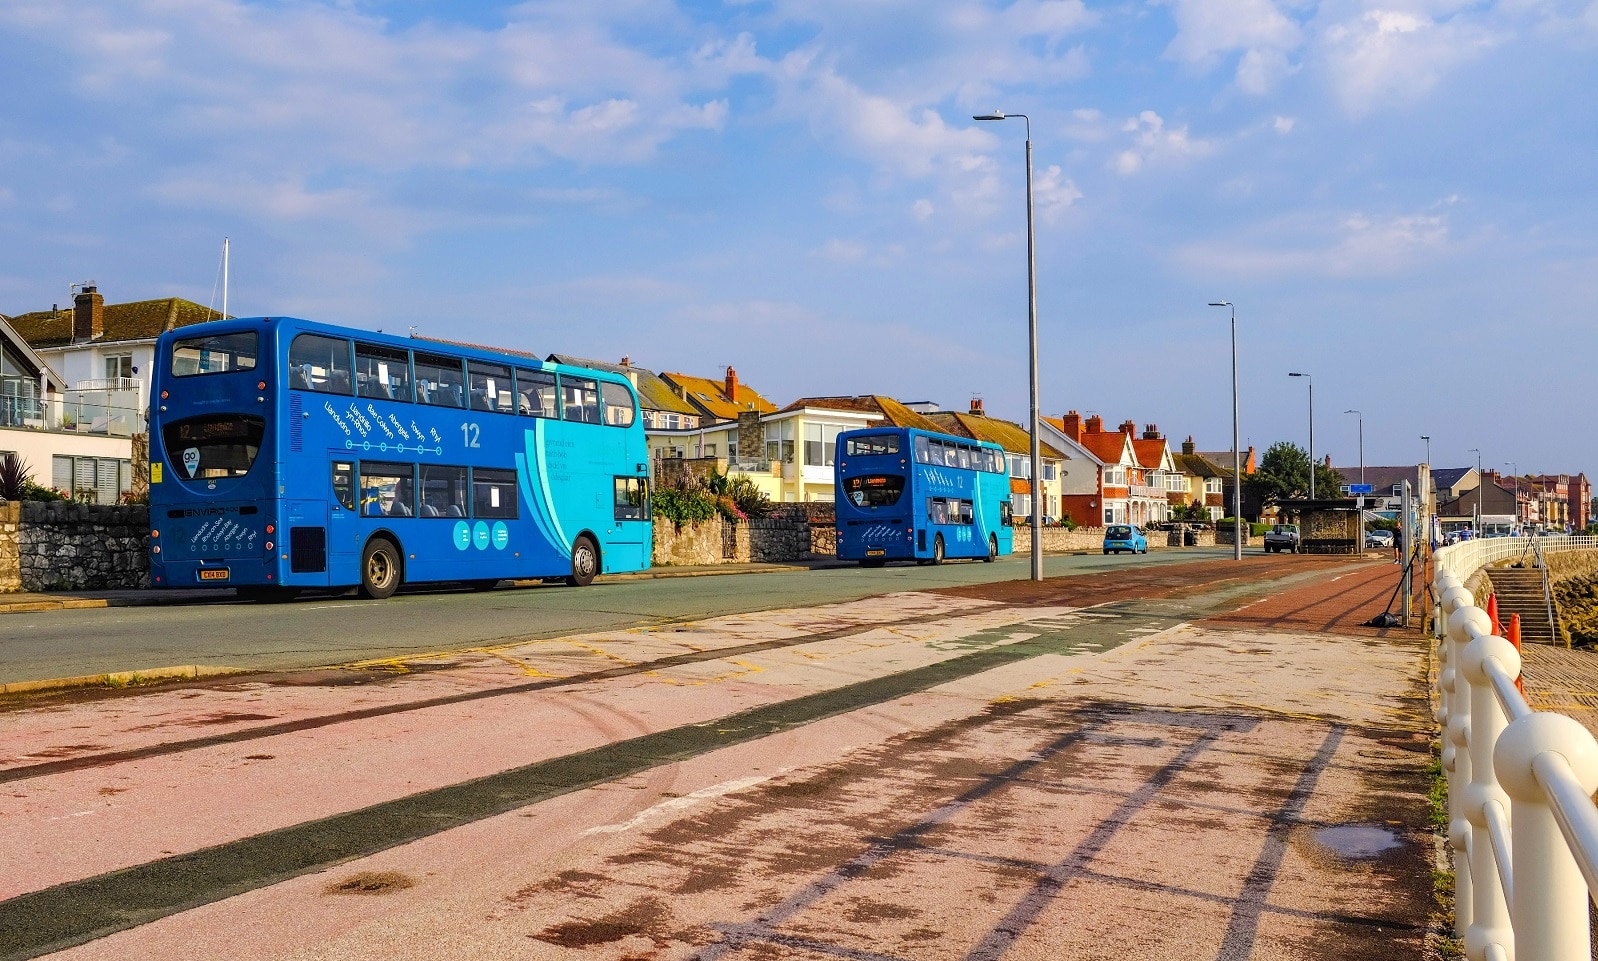 Bus Emergency Scheme 2 in Wales paves the way to partnership